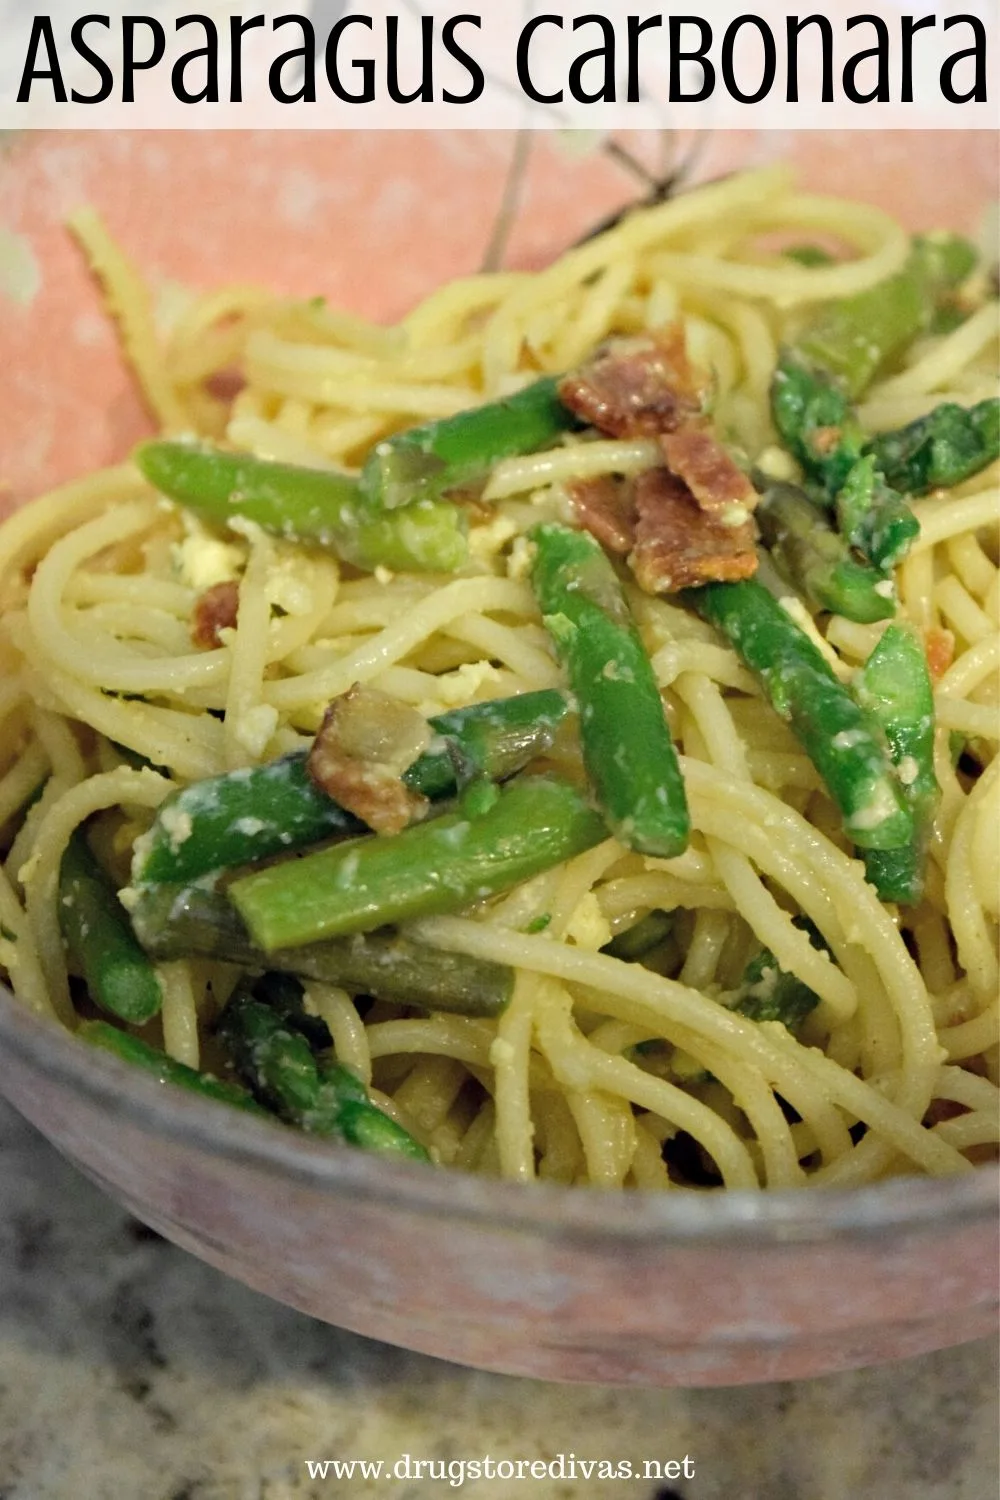 Asparagus Carbonara is such a great way to use asparagus. Plus it has bacon. Get the recipe at www.drugstoredivas.net.